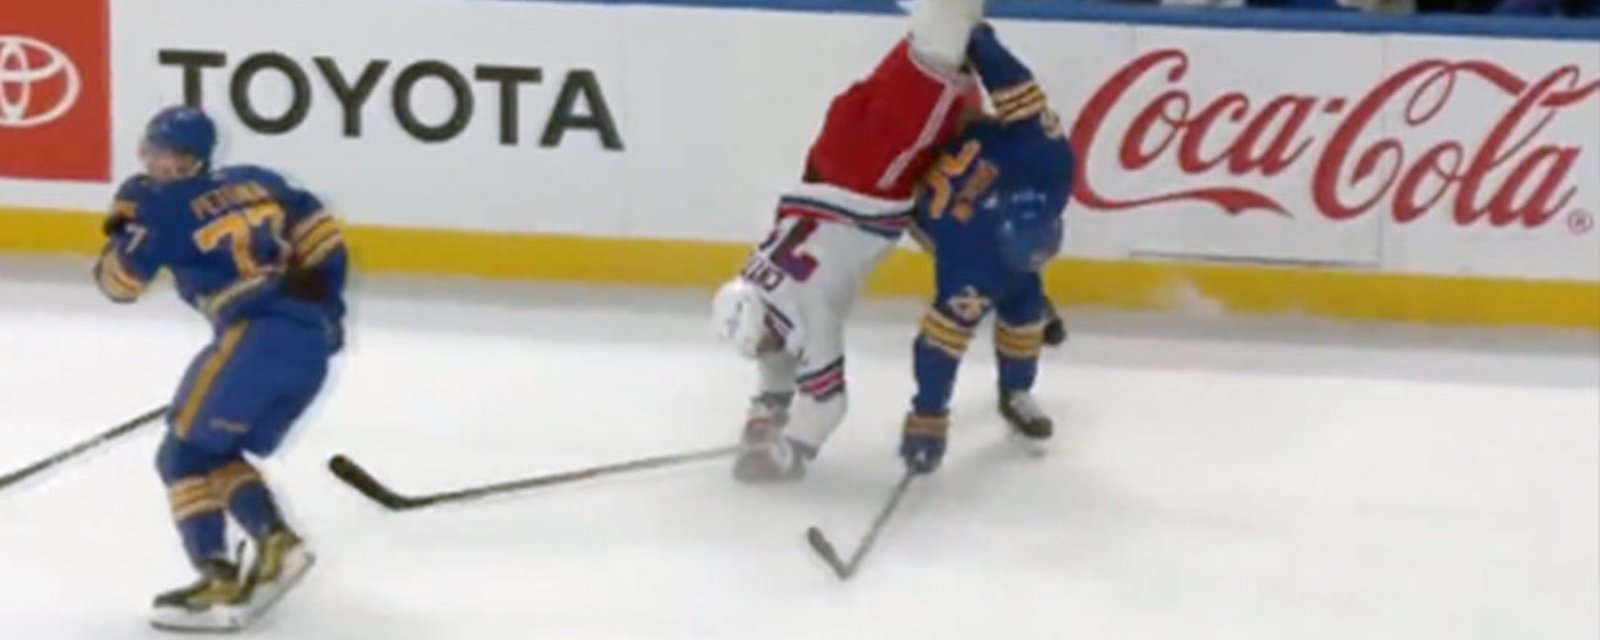 Dahlin sends Chytil flying with a perfect old school hip check